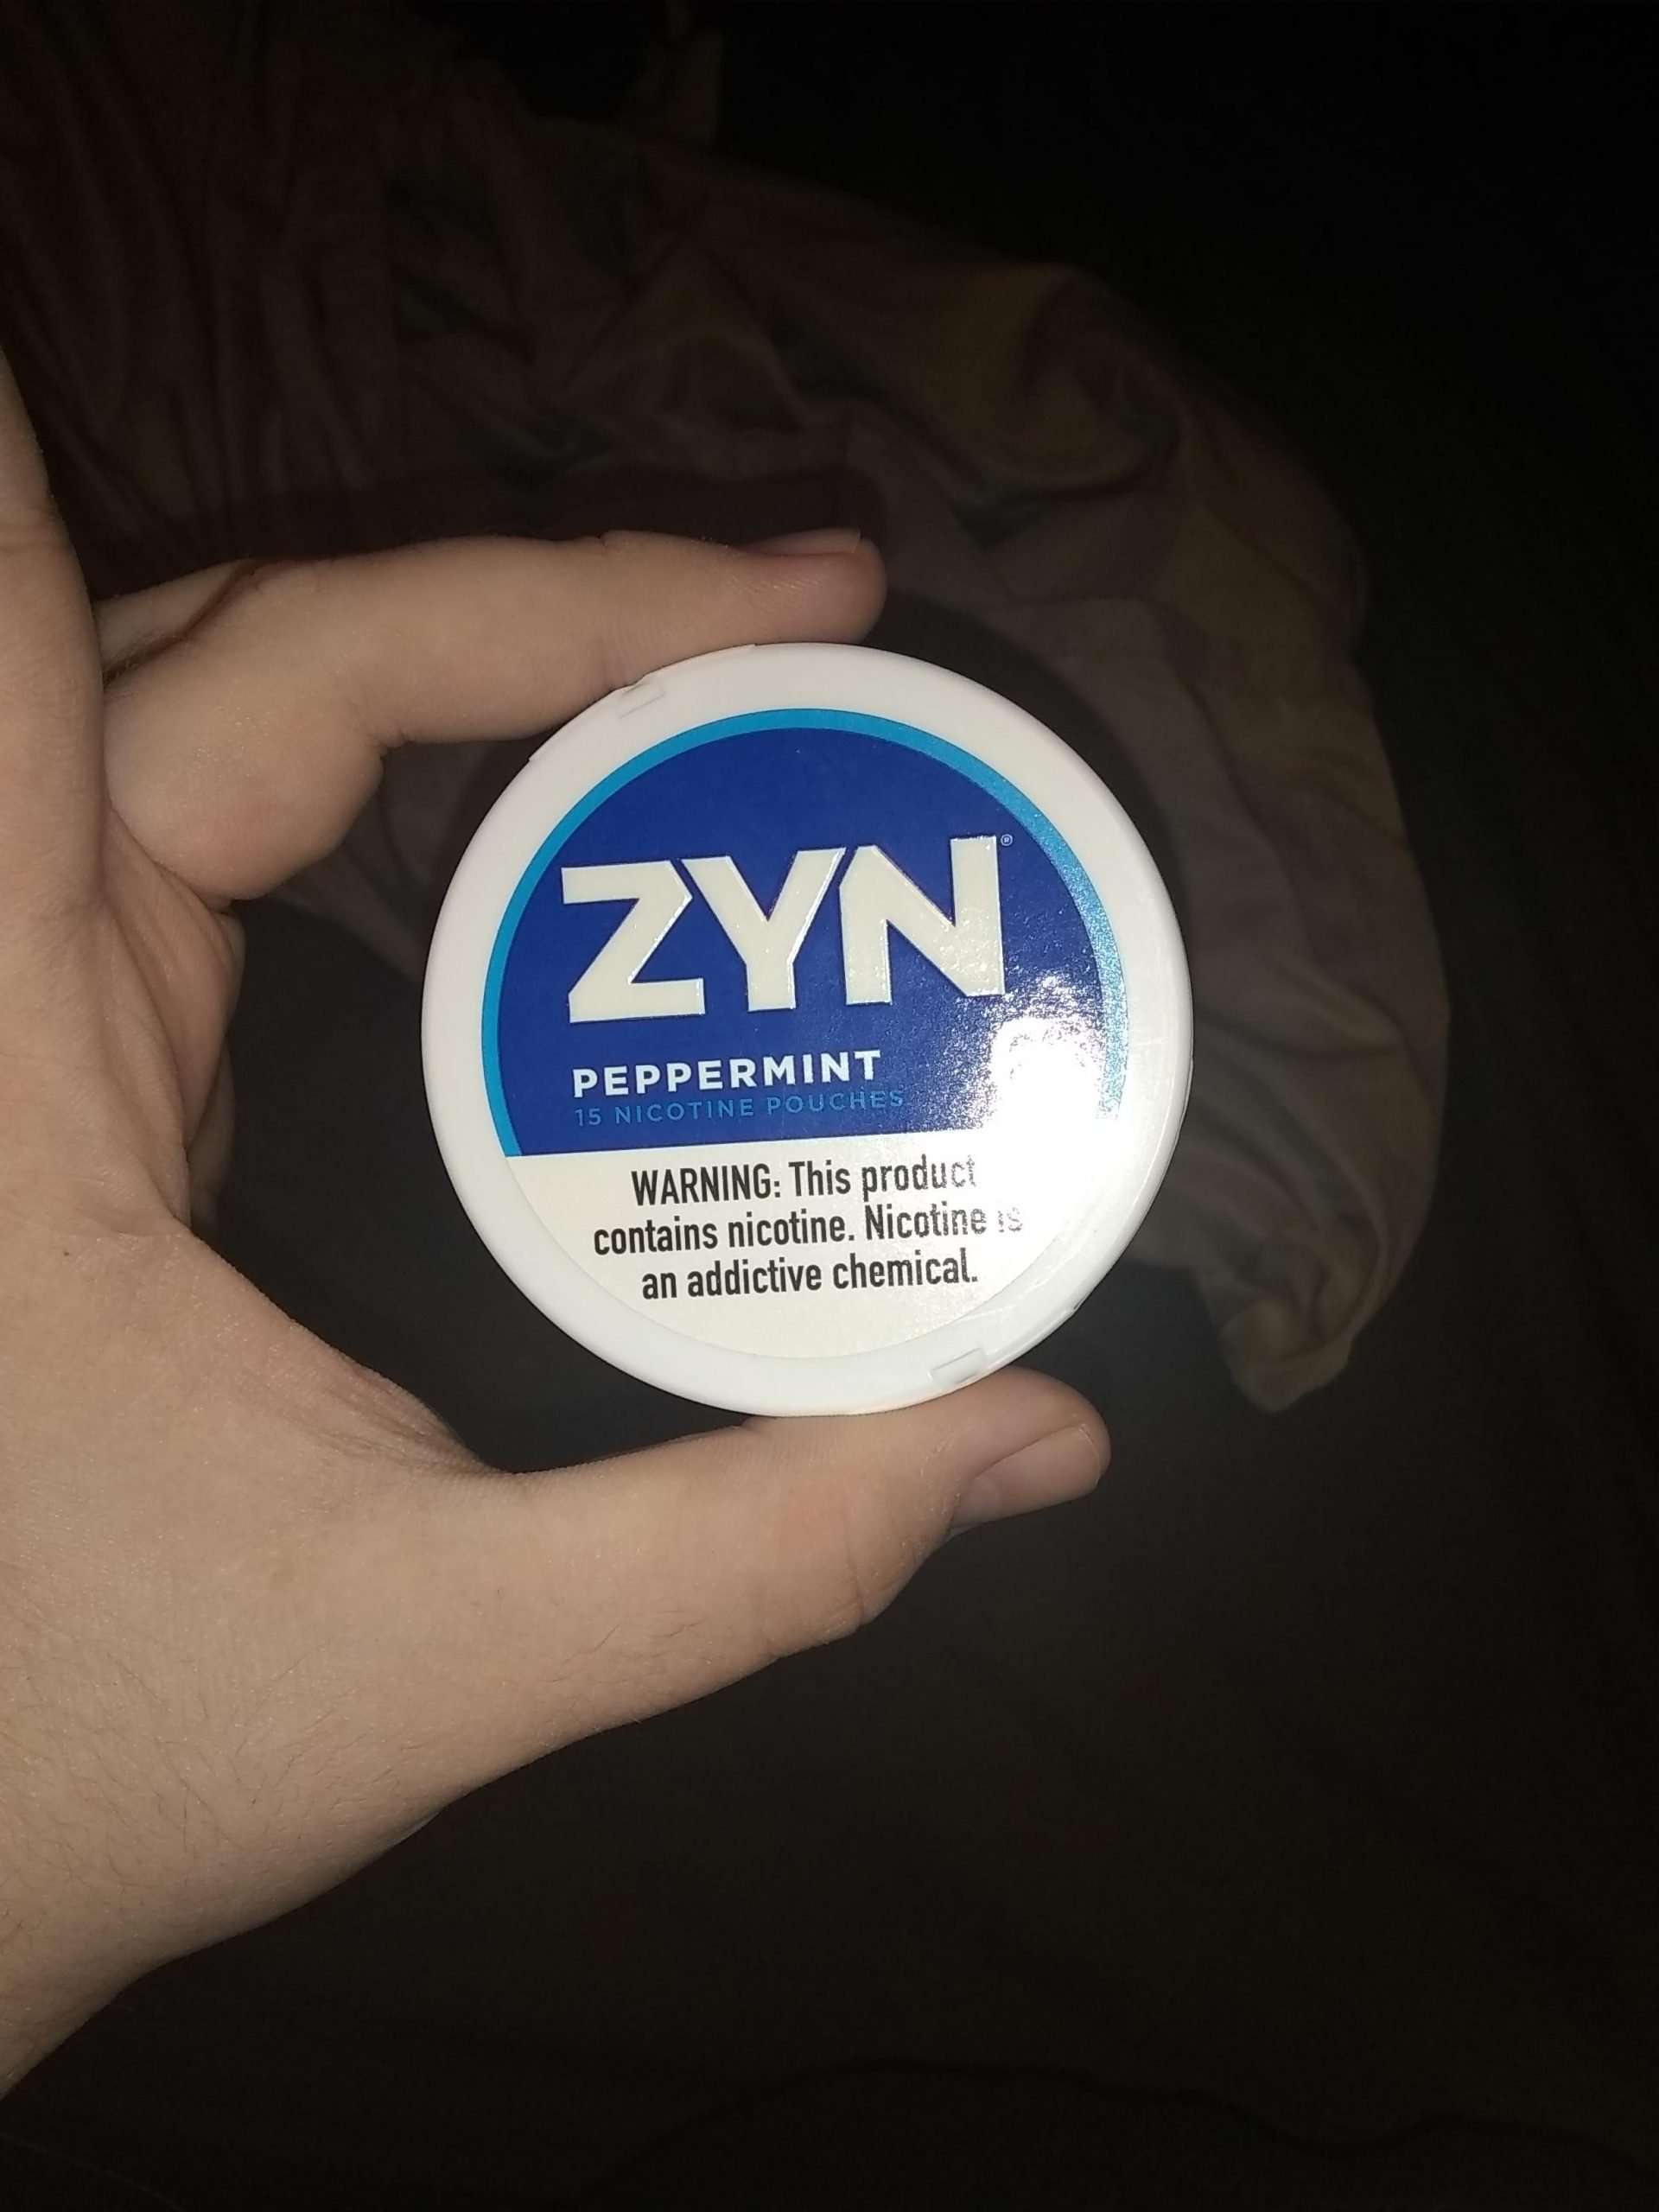 Found this ZYN today in a gas station (in Alabama, USA ...